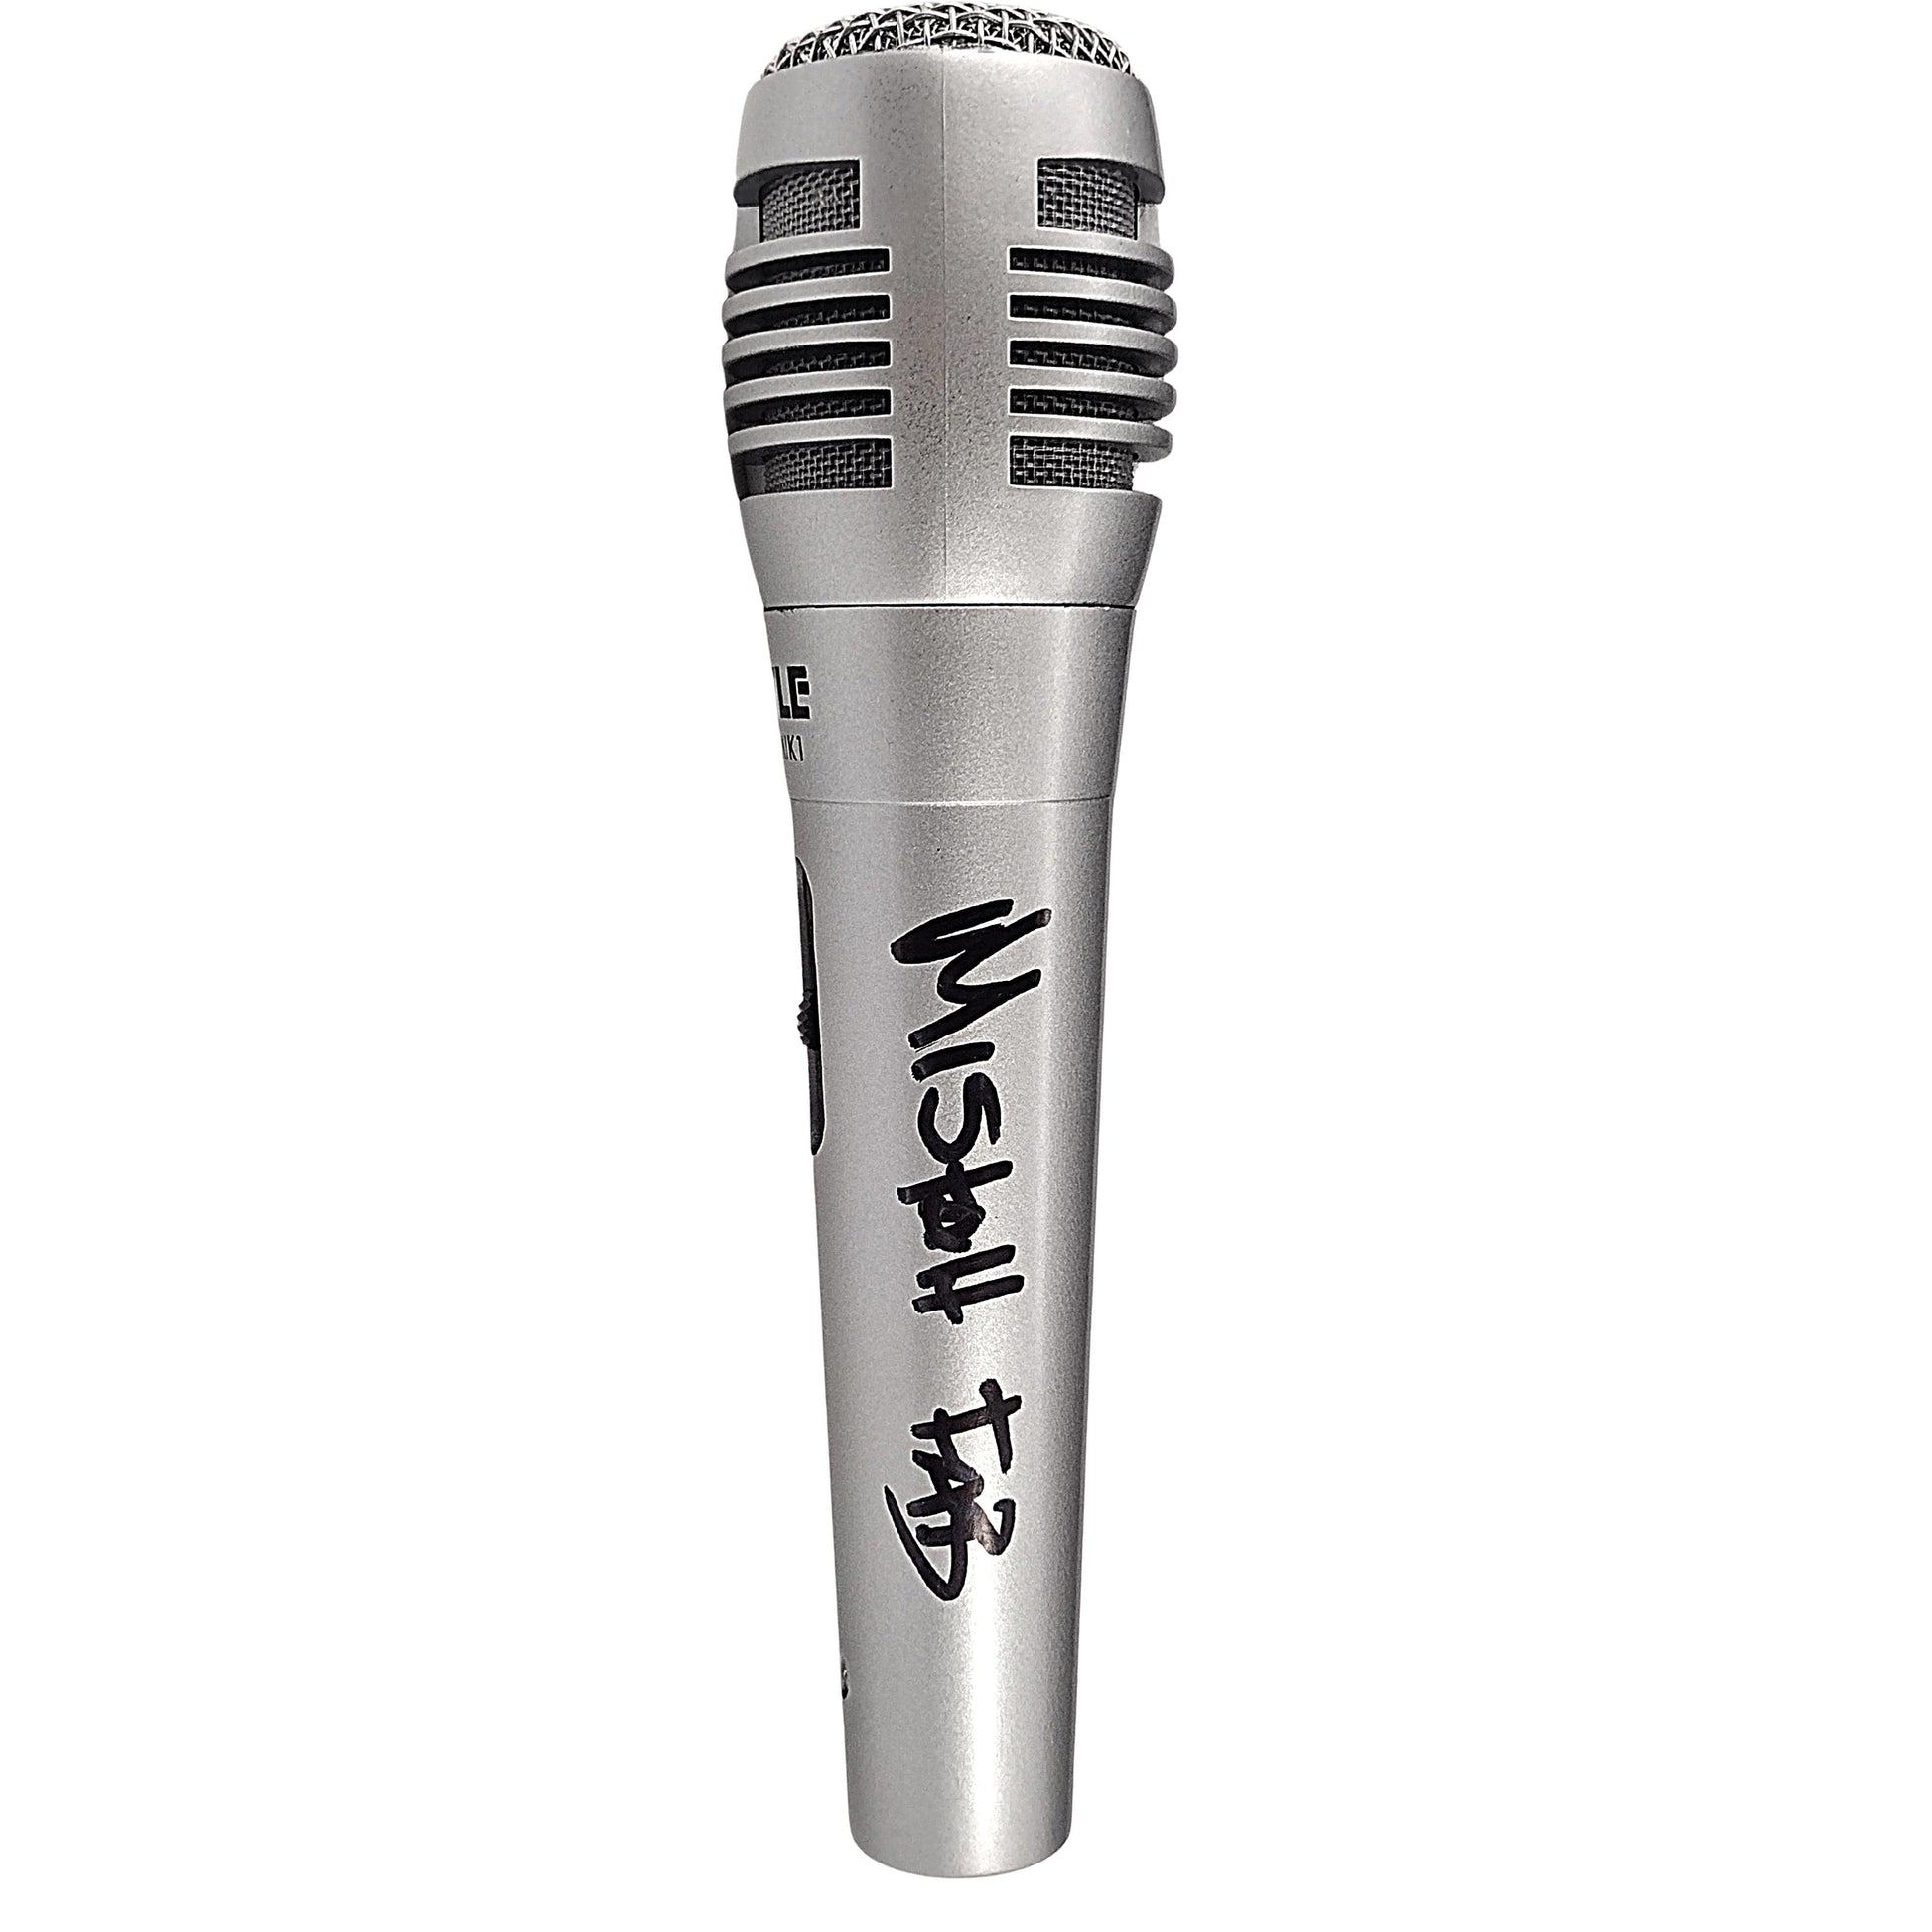 Music- Autographed- Mistah F.A.B. Signed Microphone Exact Proof Photo Beckett Authentication 105